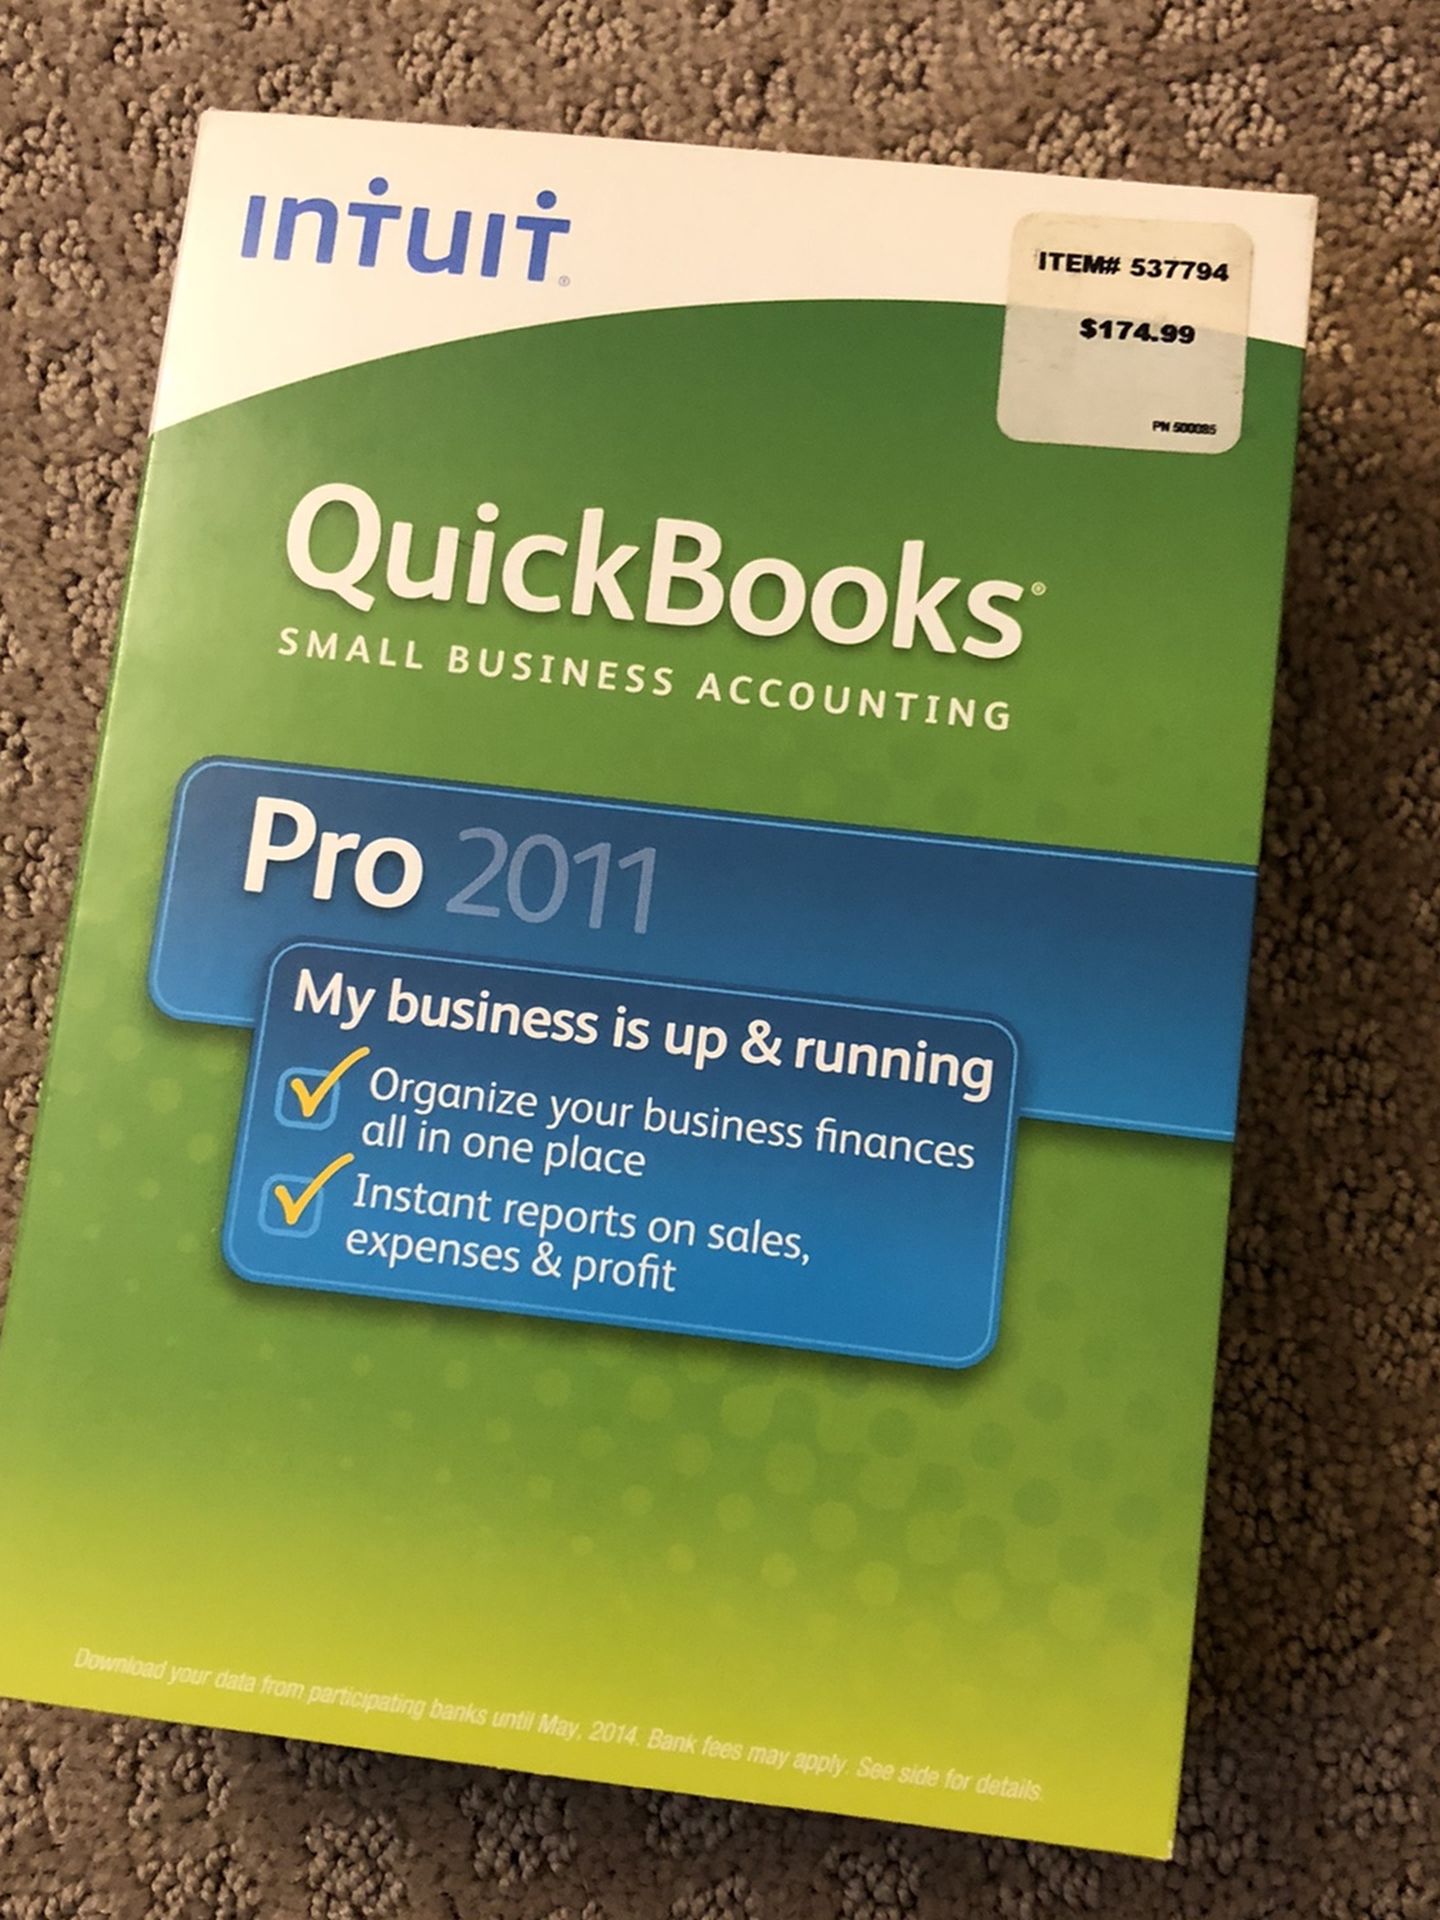 QuickBooks Pro 2011 Small Business Accounting